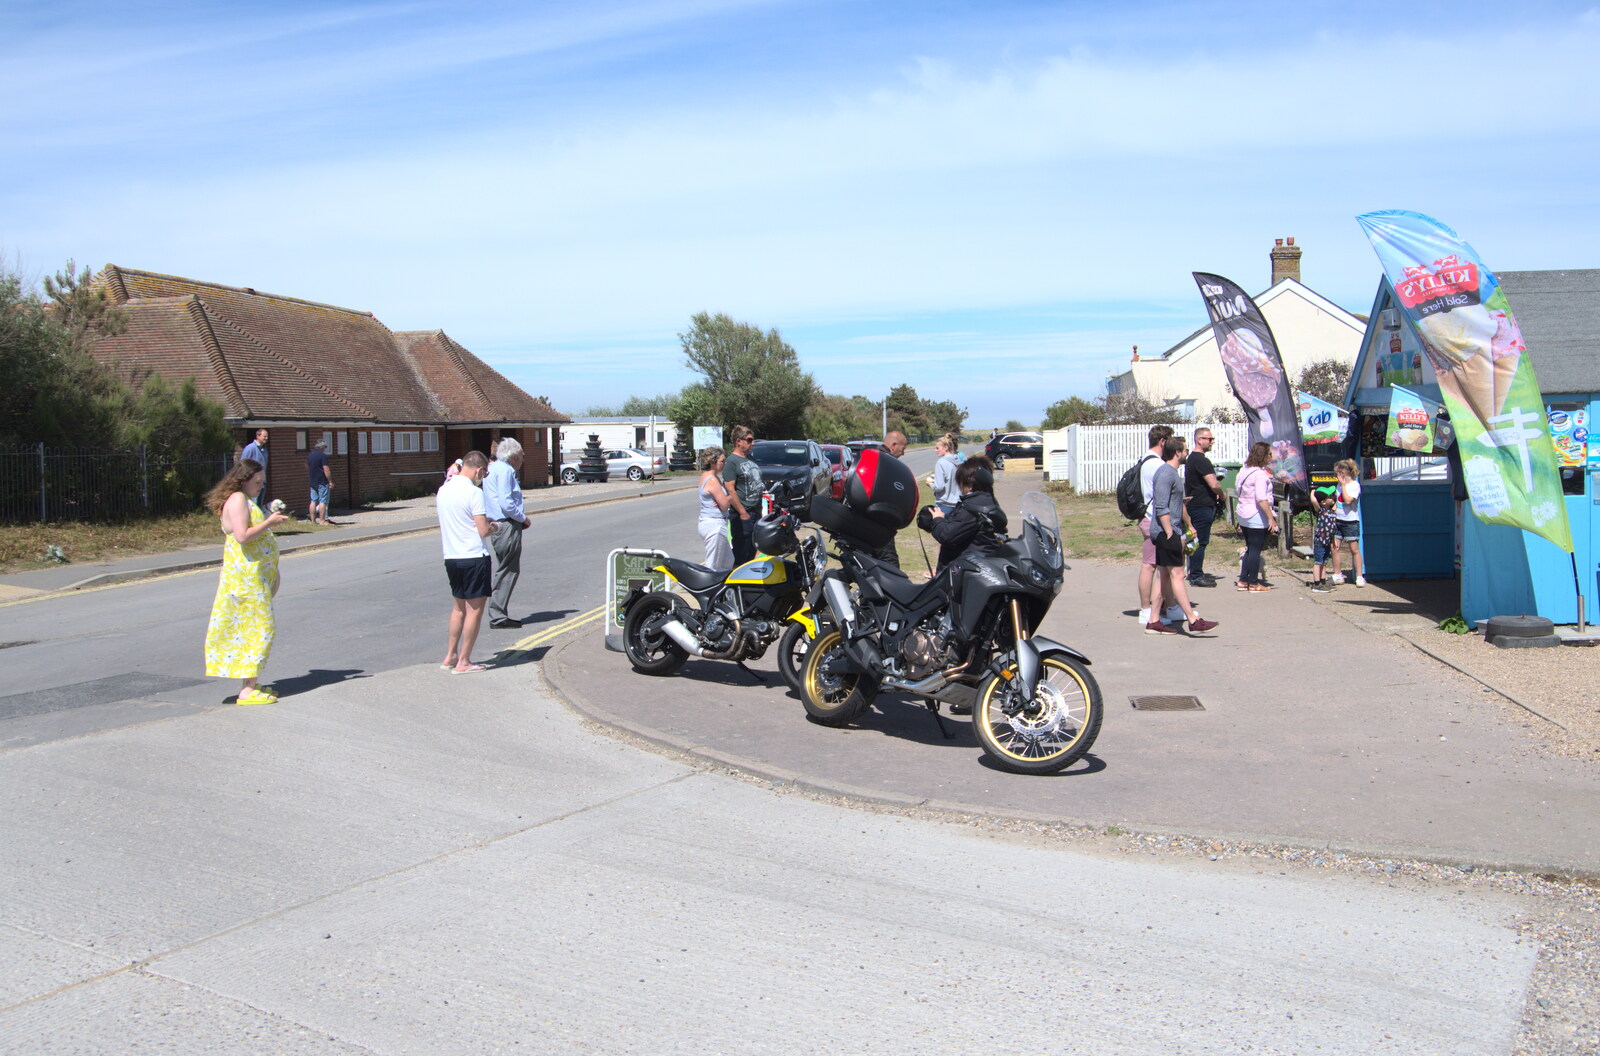 Motorbikes by the ice-cream kiosk from A Return to Southwold, Suffolk - 14th June 2020